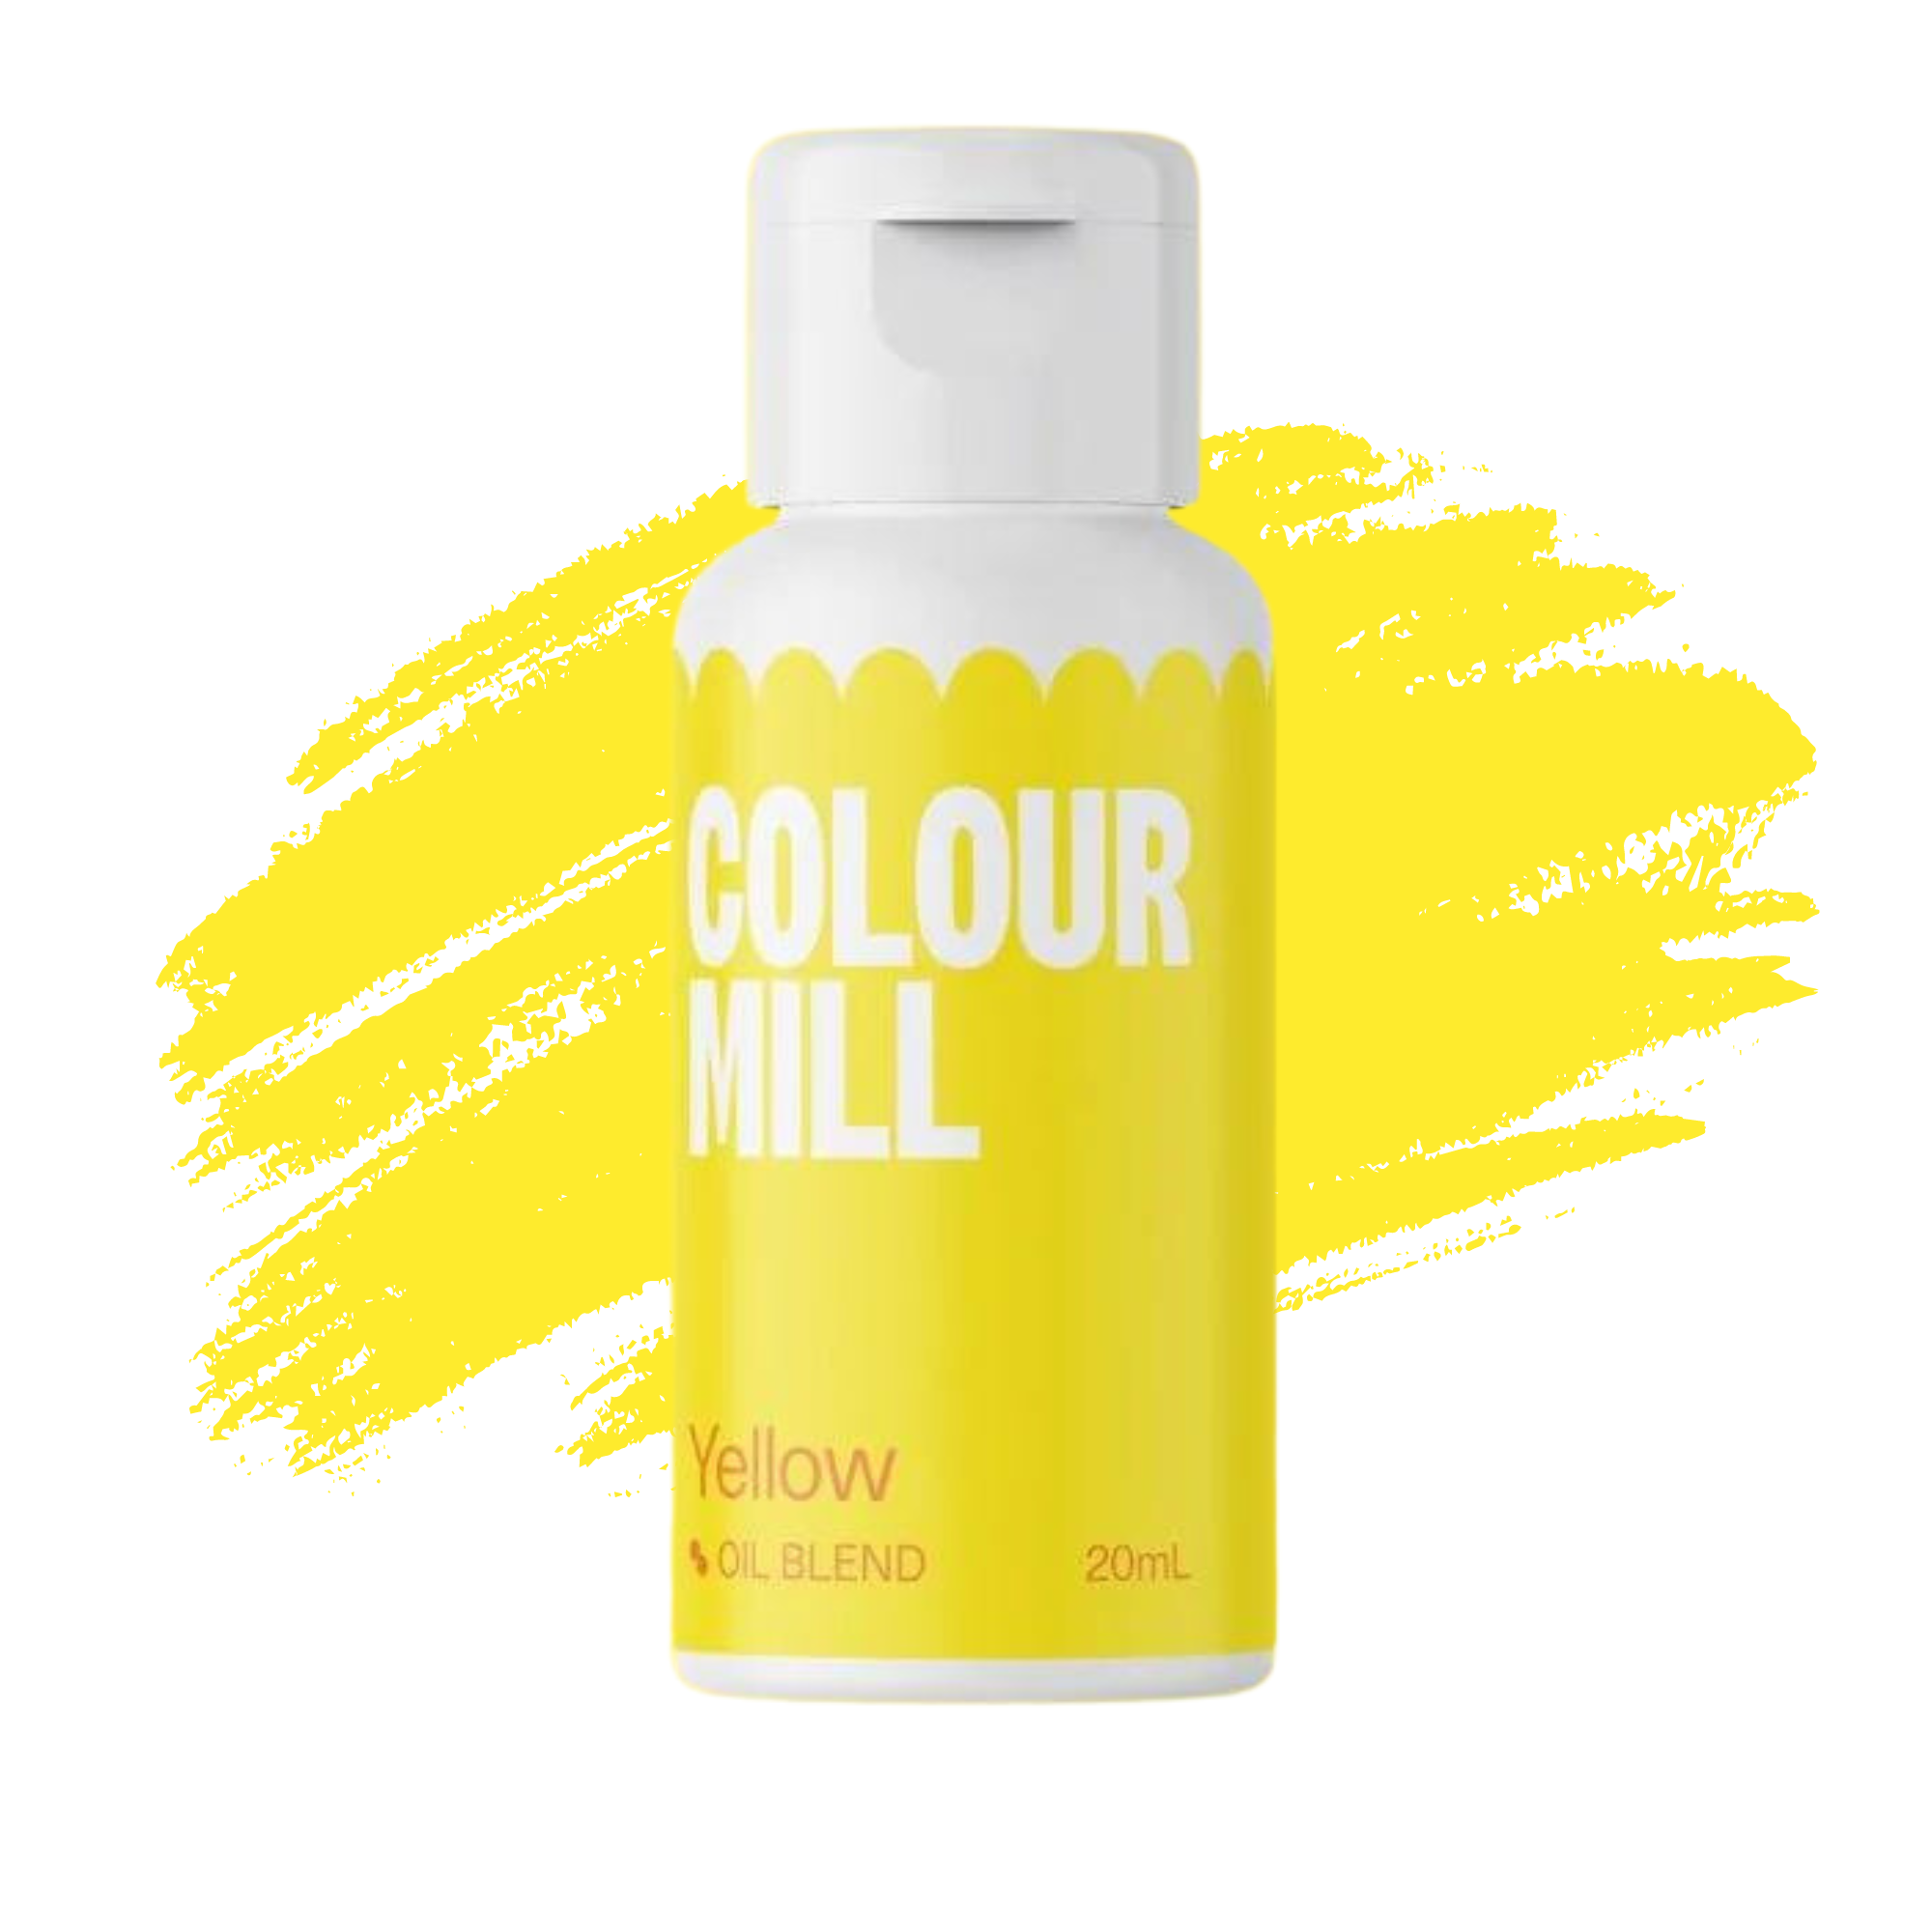 Colour Mill Yellow Food Colouring, Oil Based Food Colouring, Yellow Food Colouring, Colour Mill Food Colouring